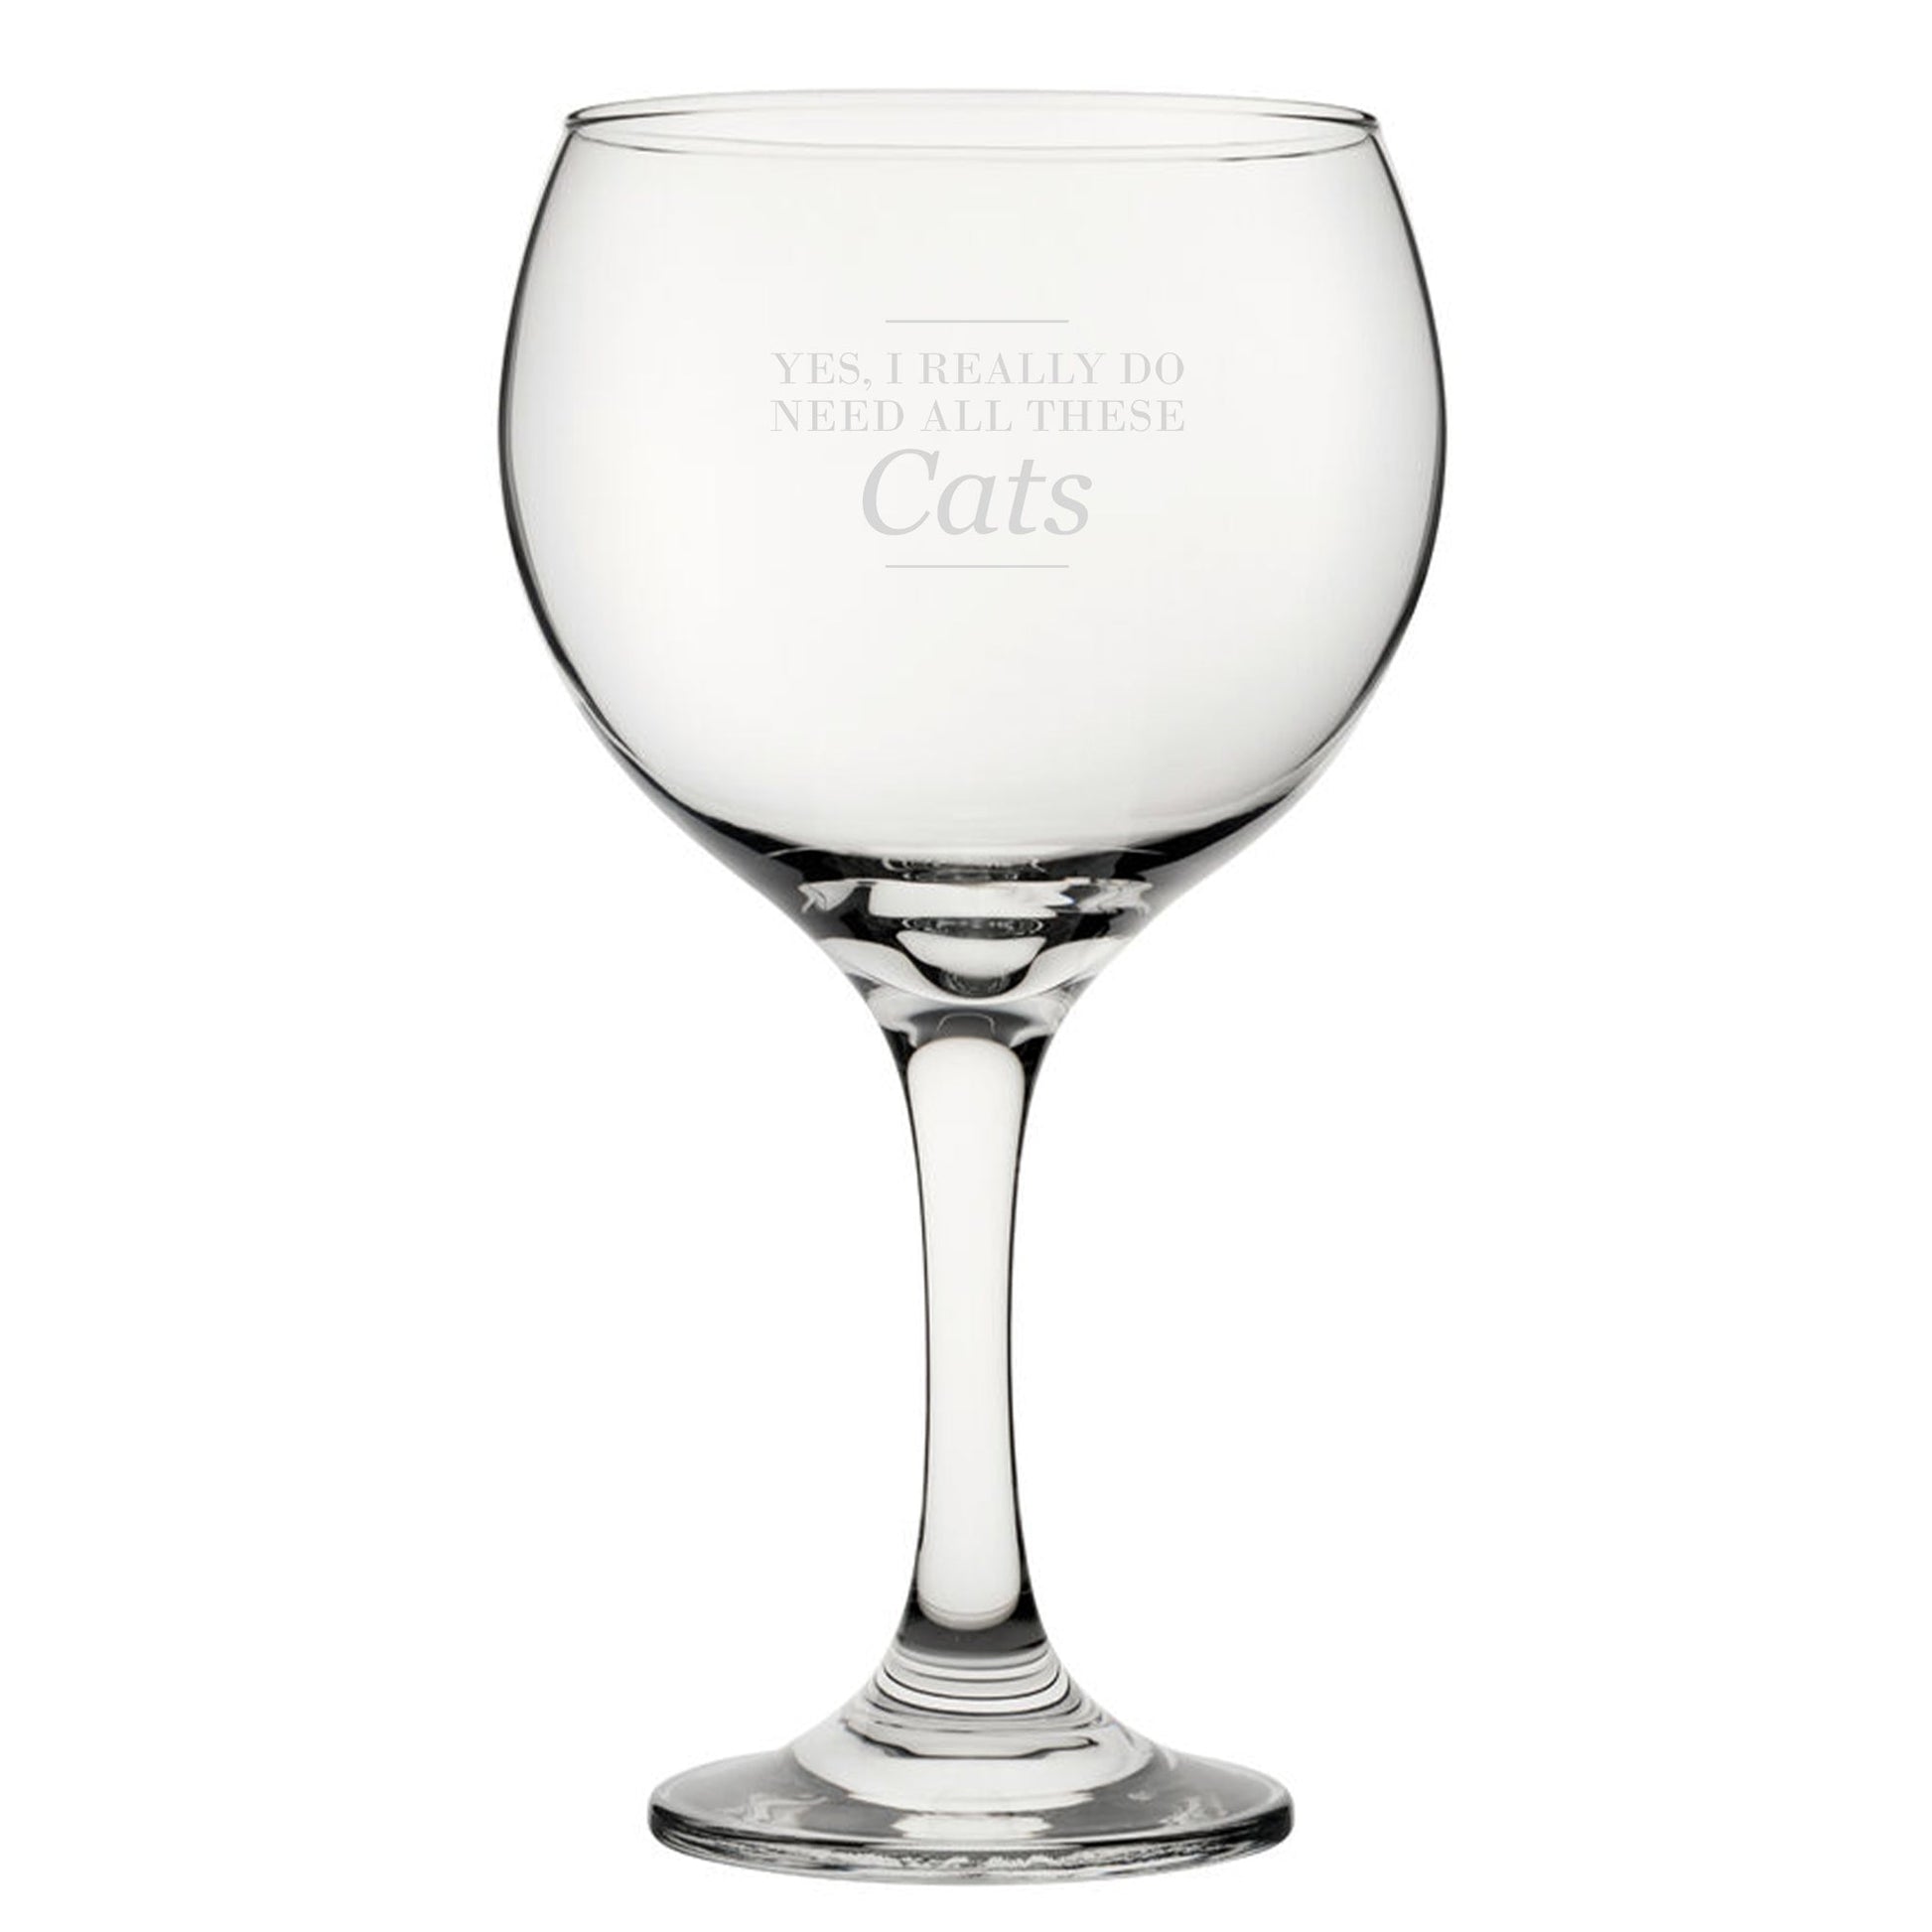 Yes, I Really Do Need All These Cats - Engraved Novelty Gin Balloon Cocktail Glass Image 1